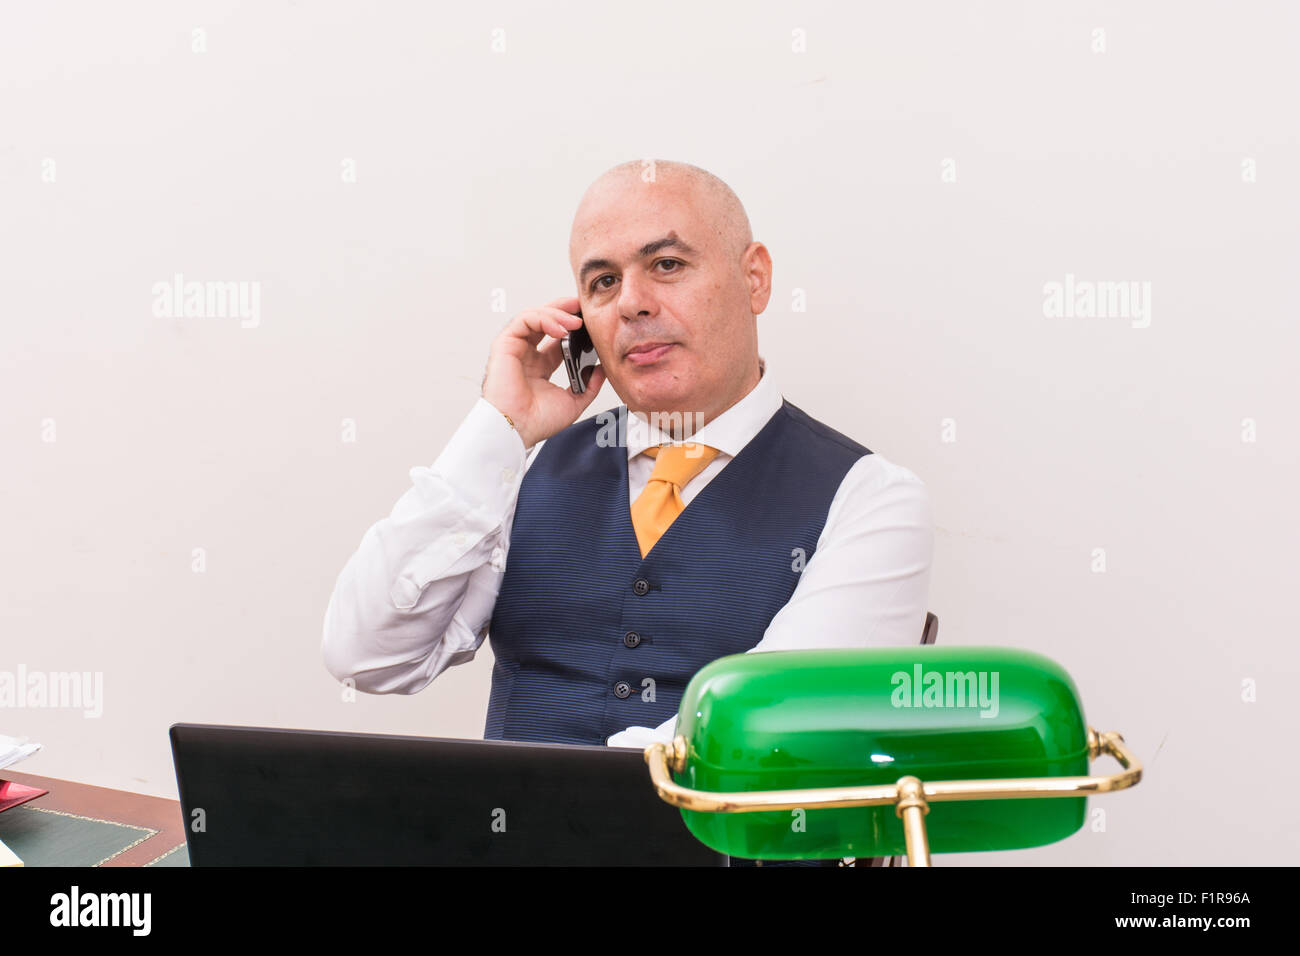 A business man on the phone and pc, at desk, in conference call and bald. An antique desk and important. Stock Photo